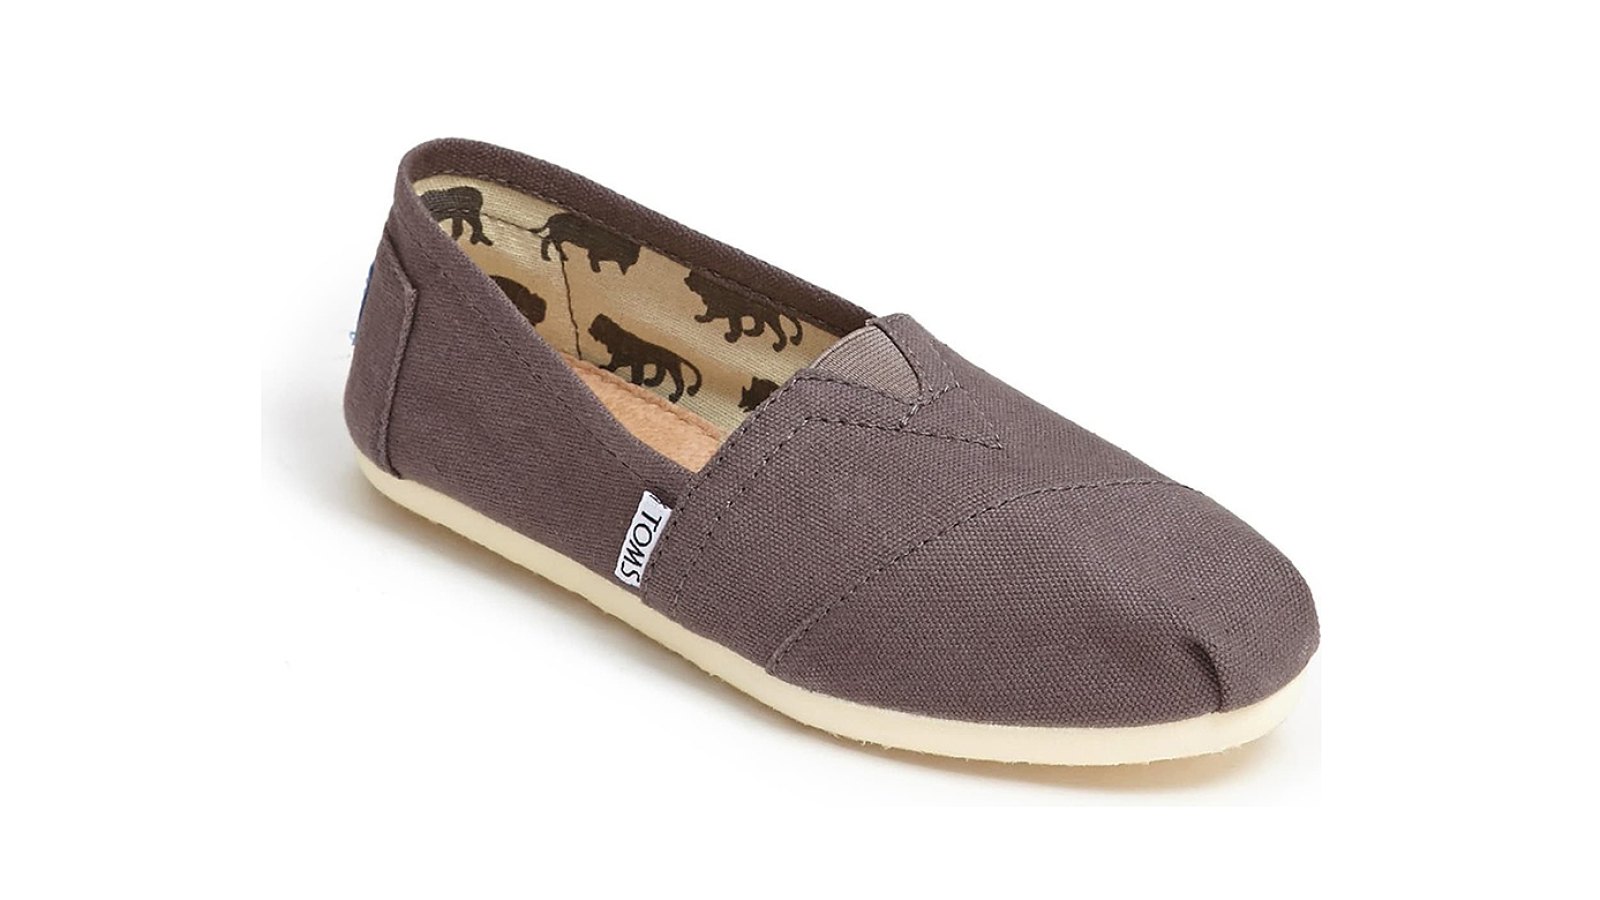 TOMS Classic Canvas Slip-On